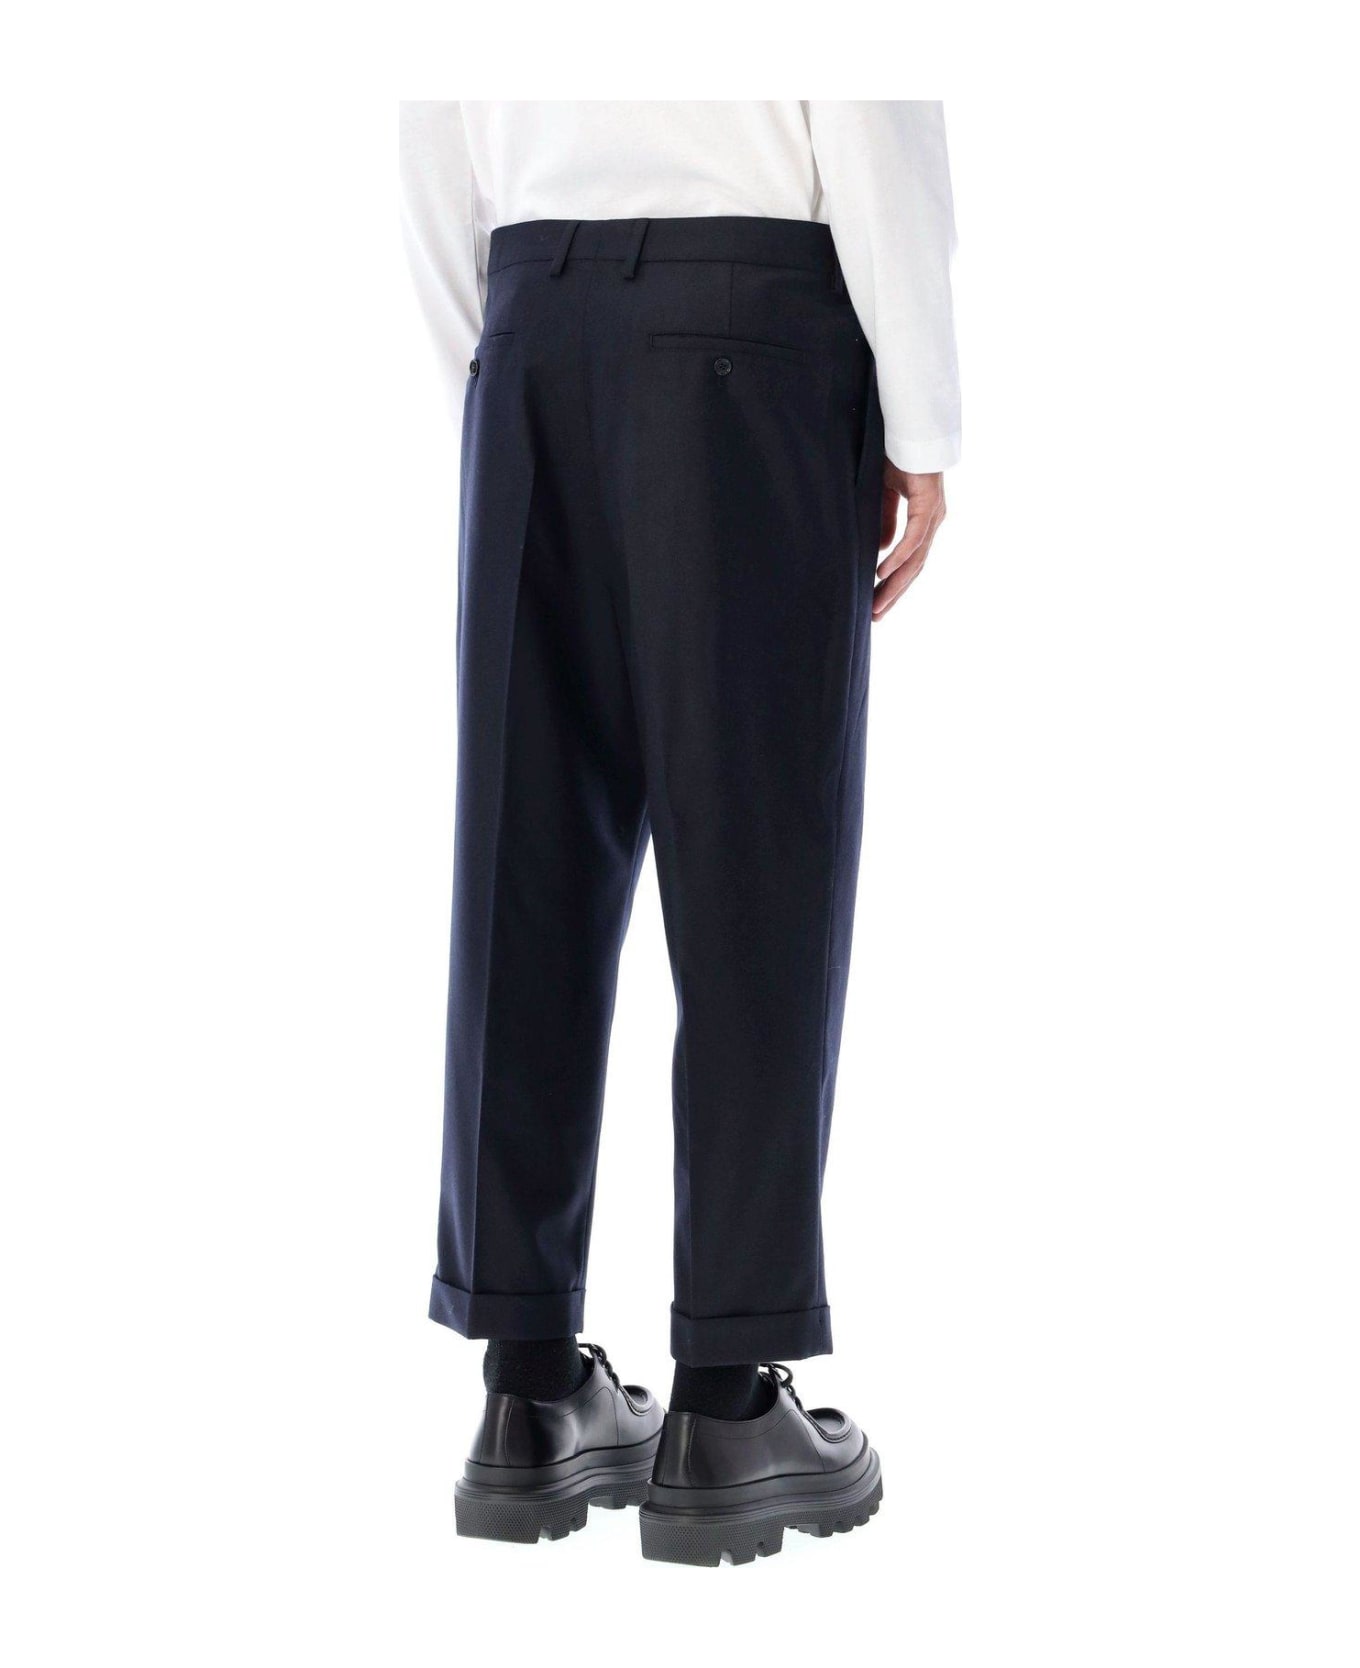 Ami Alexandre Mattiussi Pleated Carrot Fit Trousers - Blue ボトムス